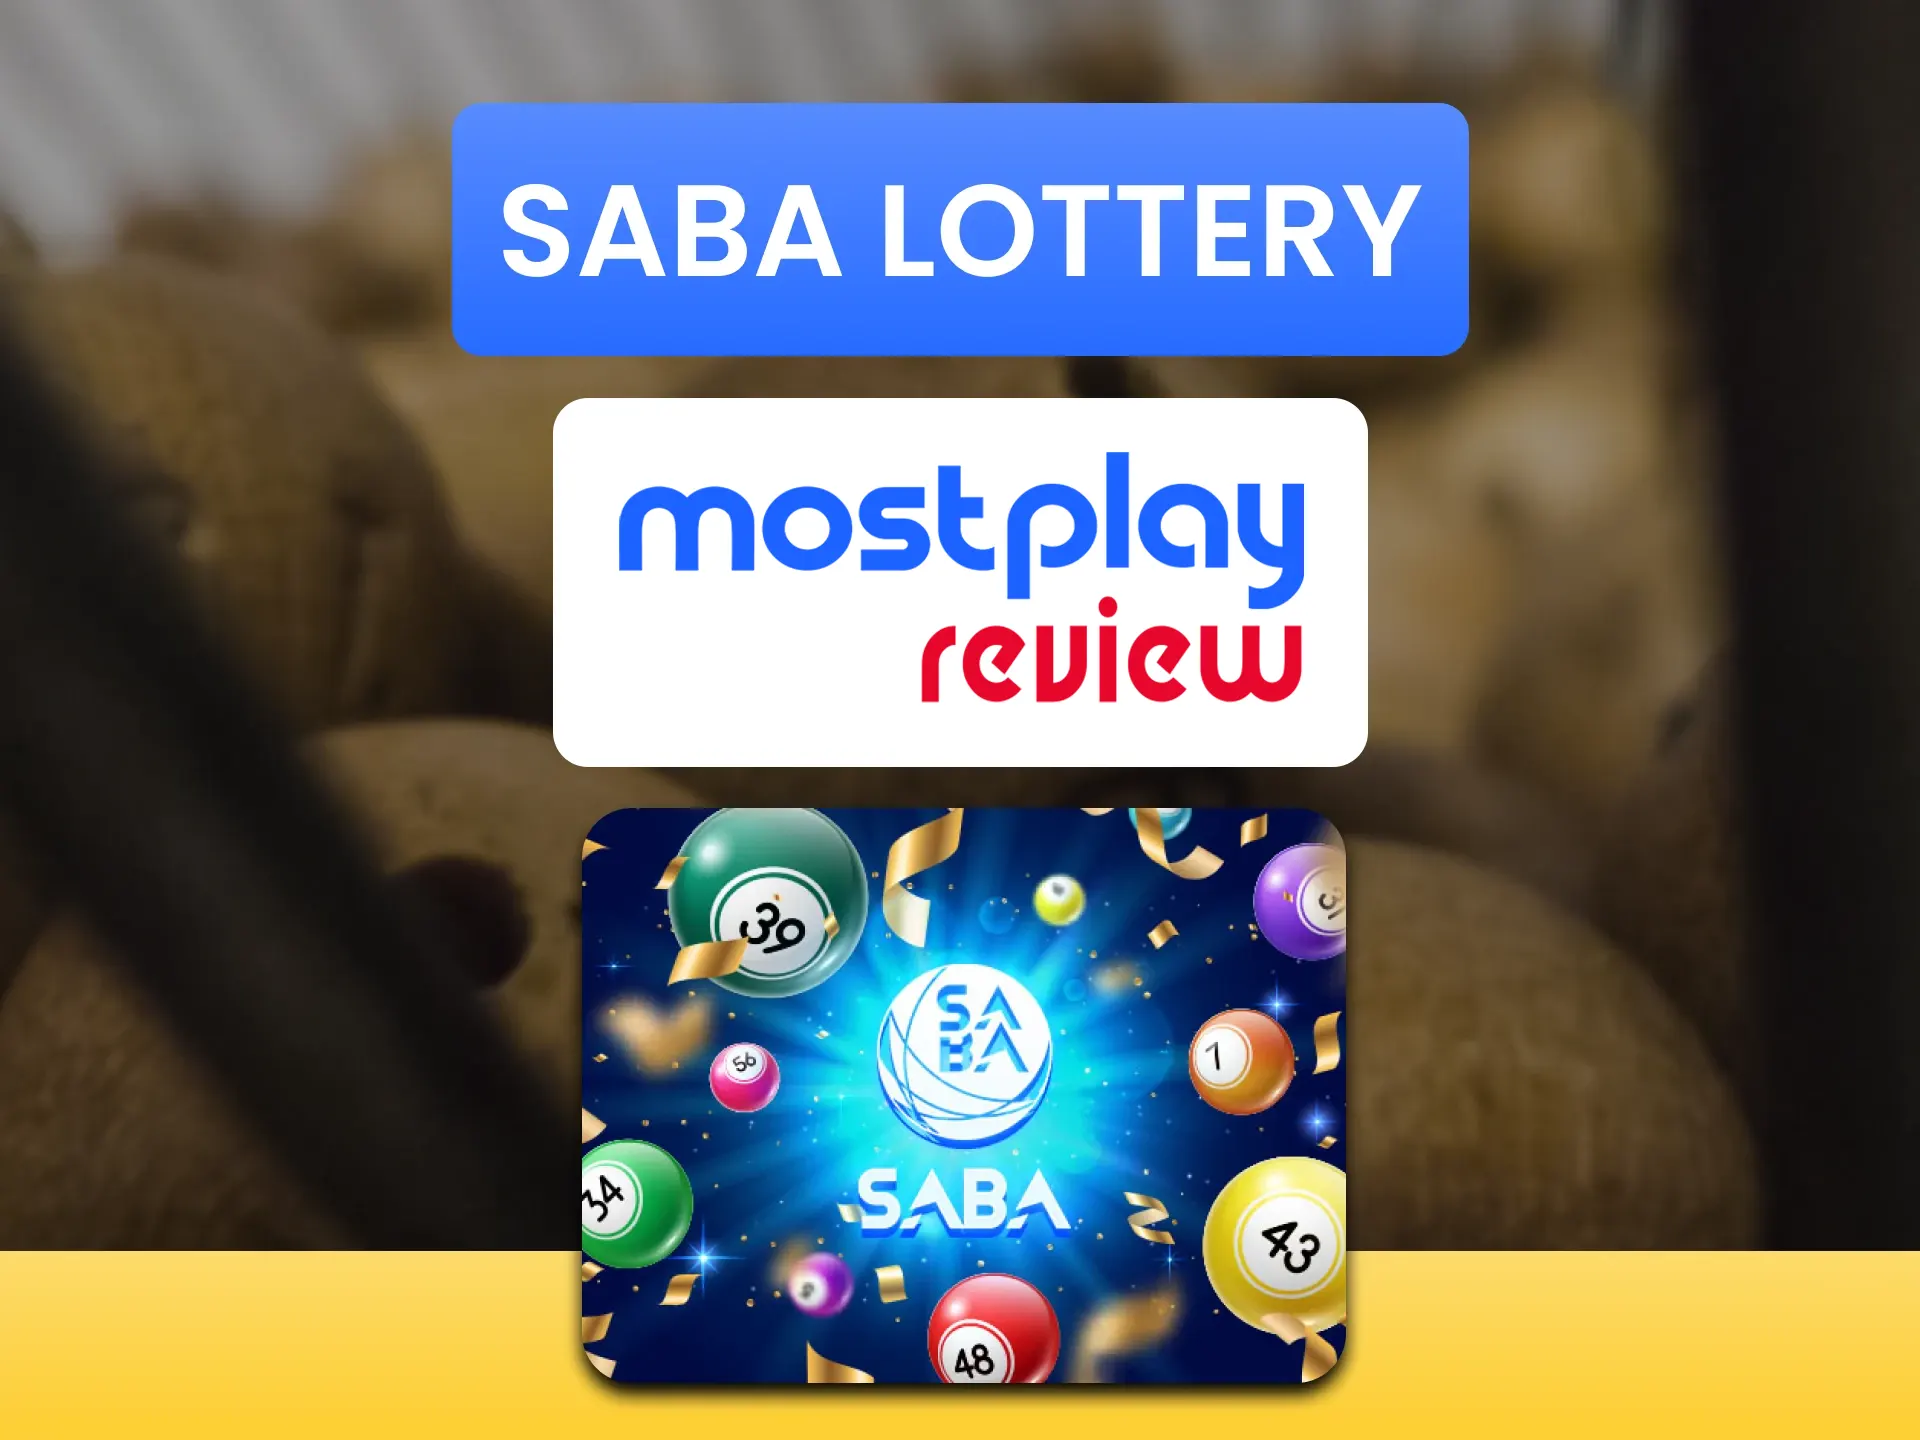 Play lottery games at the Mostplay casino and win money.